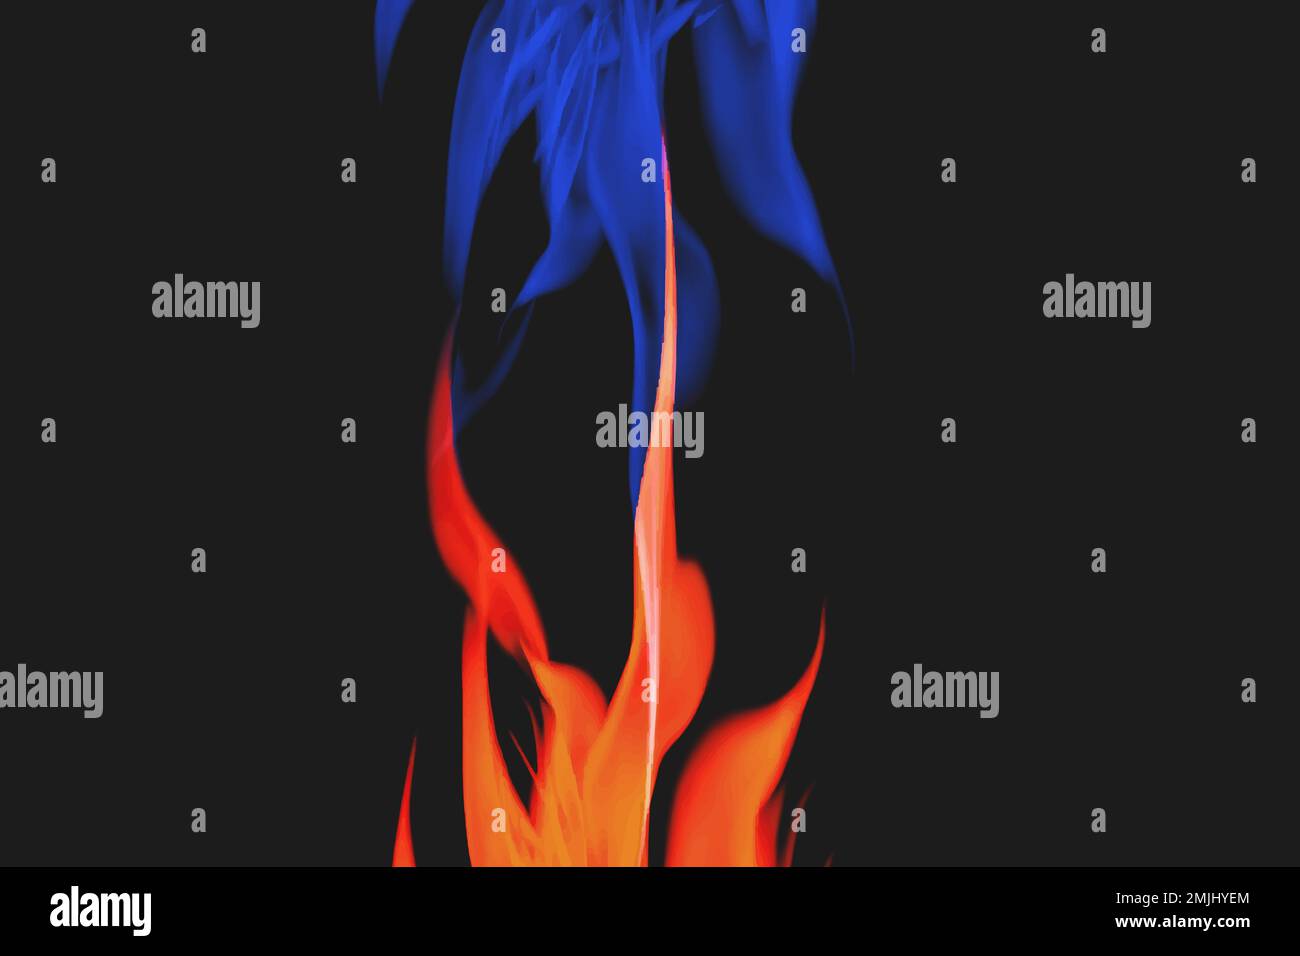 Blue flame background, aesthetic neon fire vector image Stock Vector